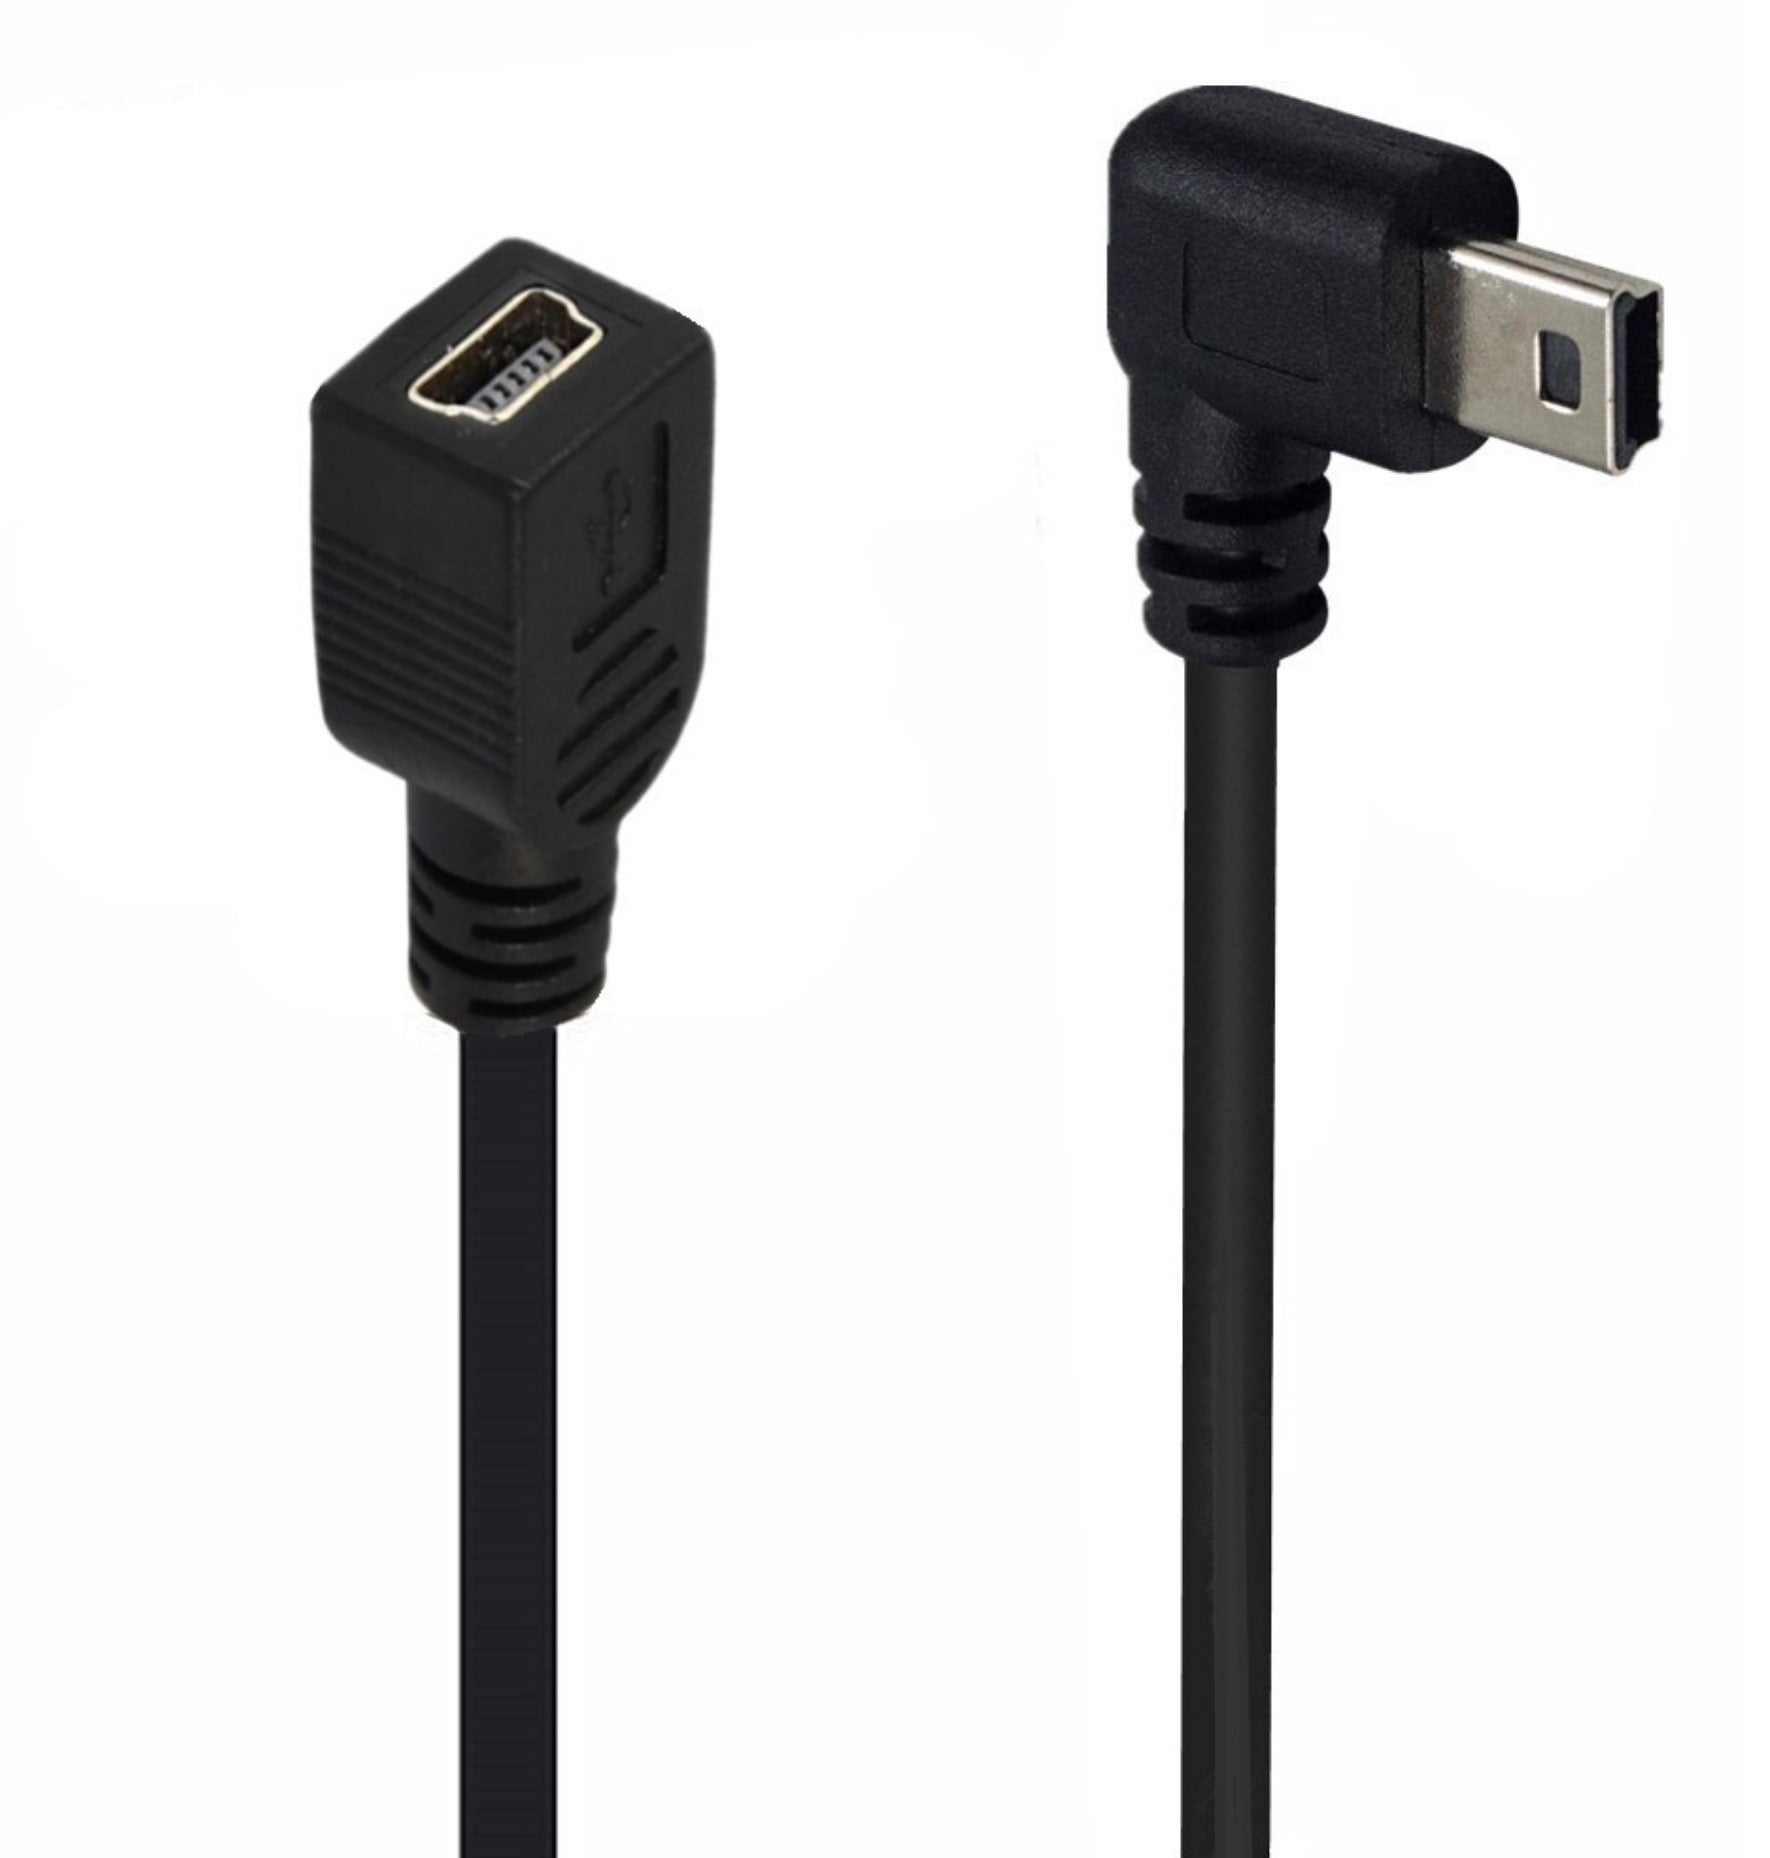 Mini USB 2.0 Type-B Male to Female Extension Cable 0.25m